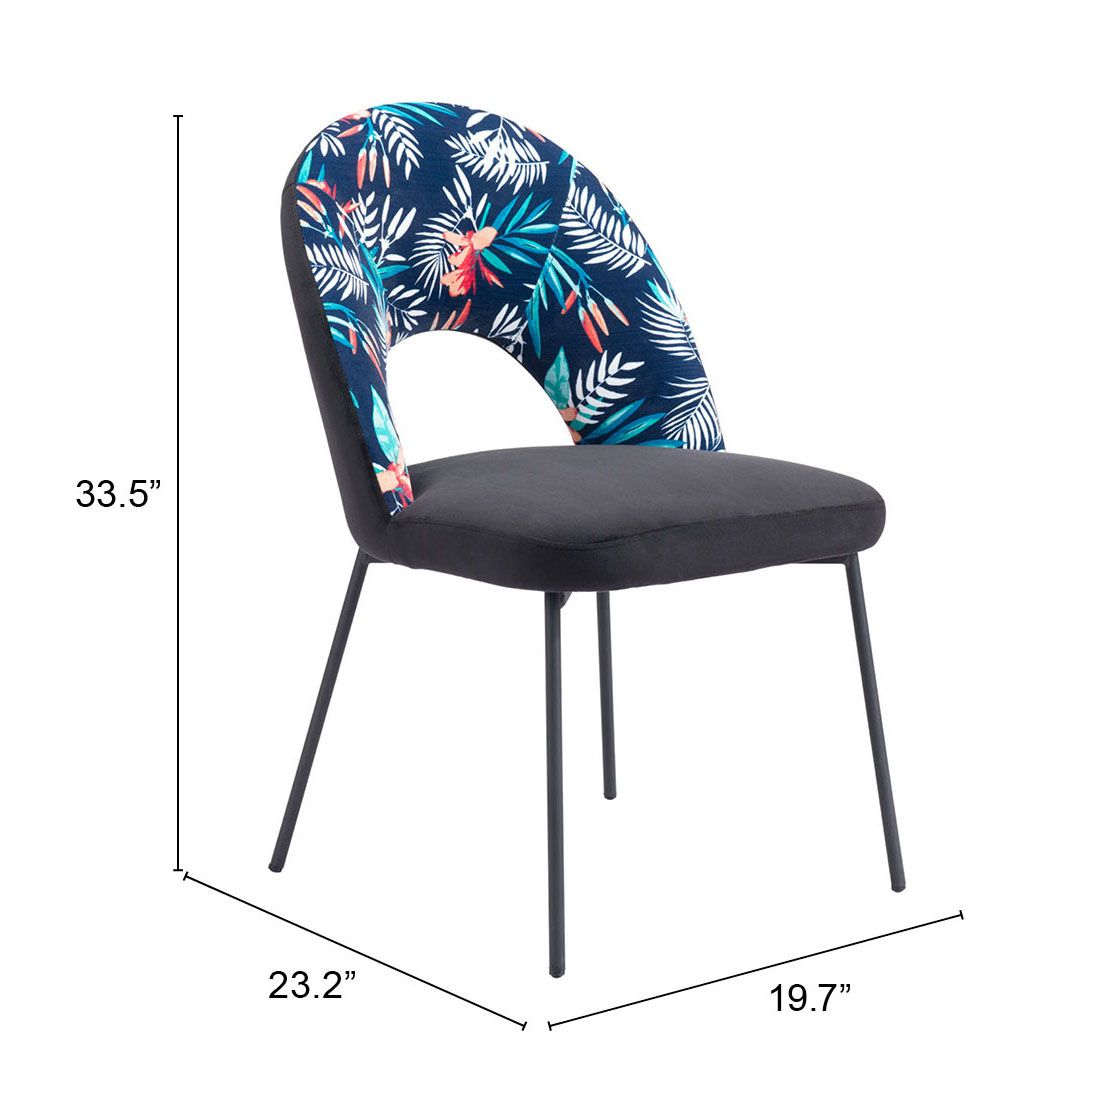 Merion Dining Chair Multicolor Print & Black